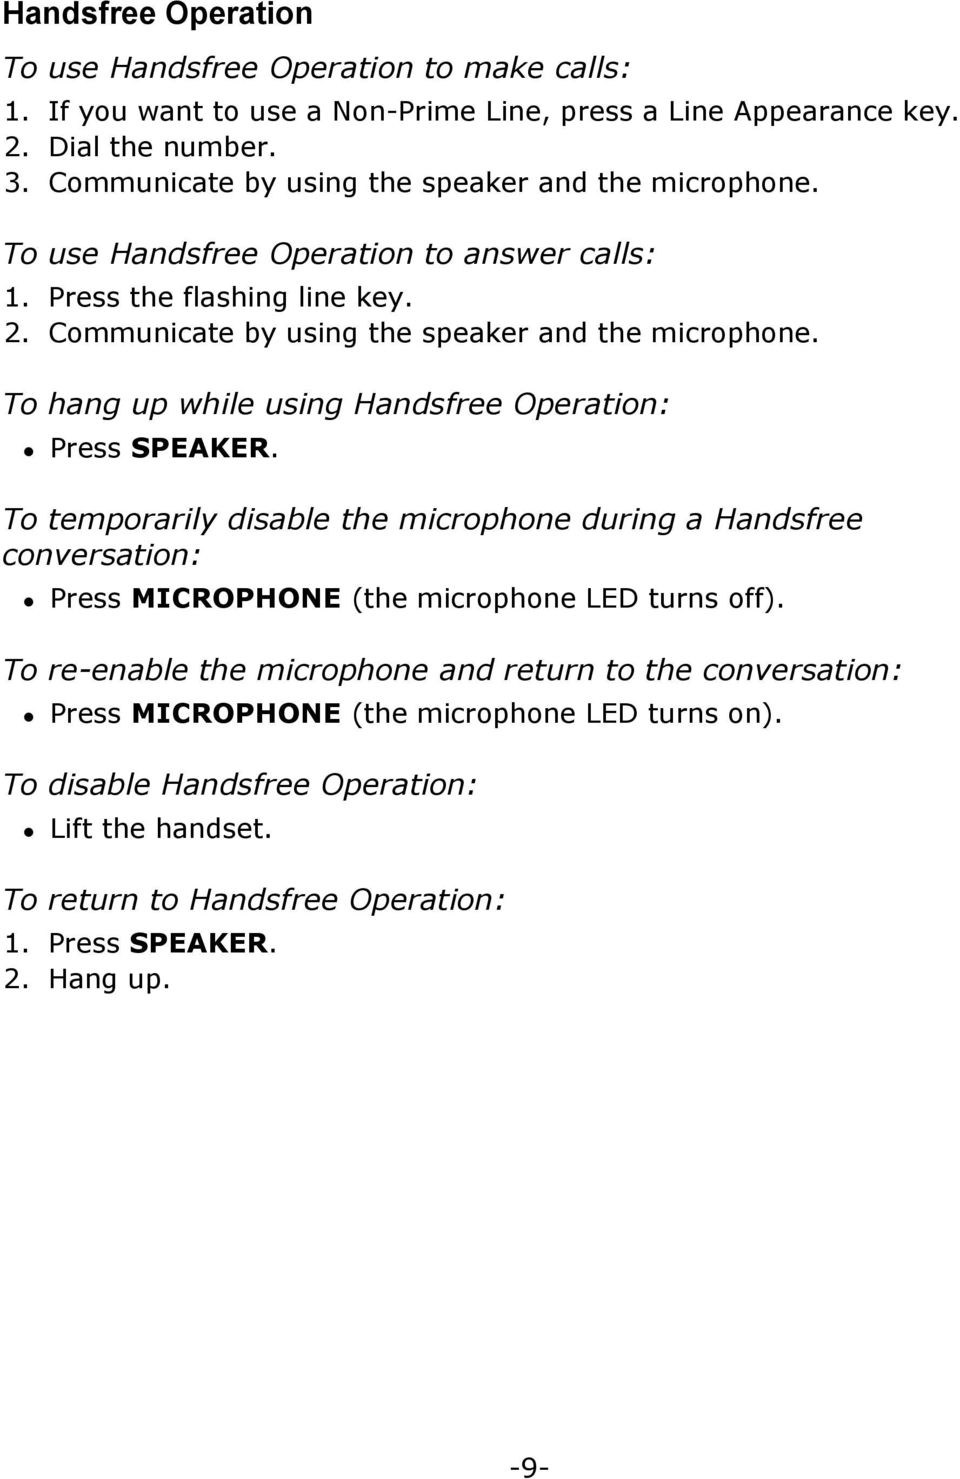 To hang up while using Handsfree Operation:! Press SPEAKER. To temporarily disable the microphone during a Handsfree conversation:! Press MICROPHONE (the microphone LED turns off).